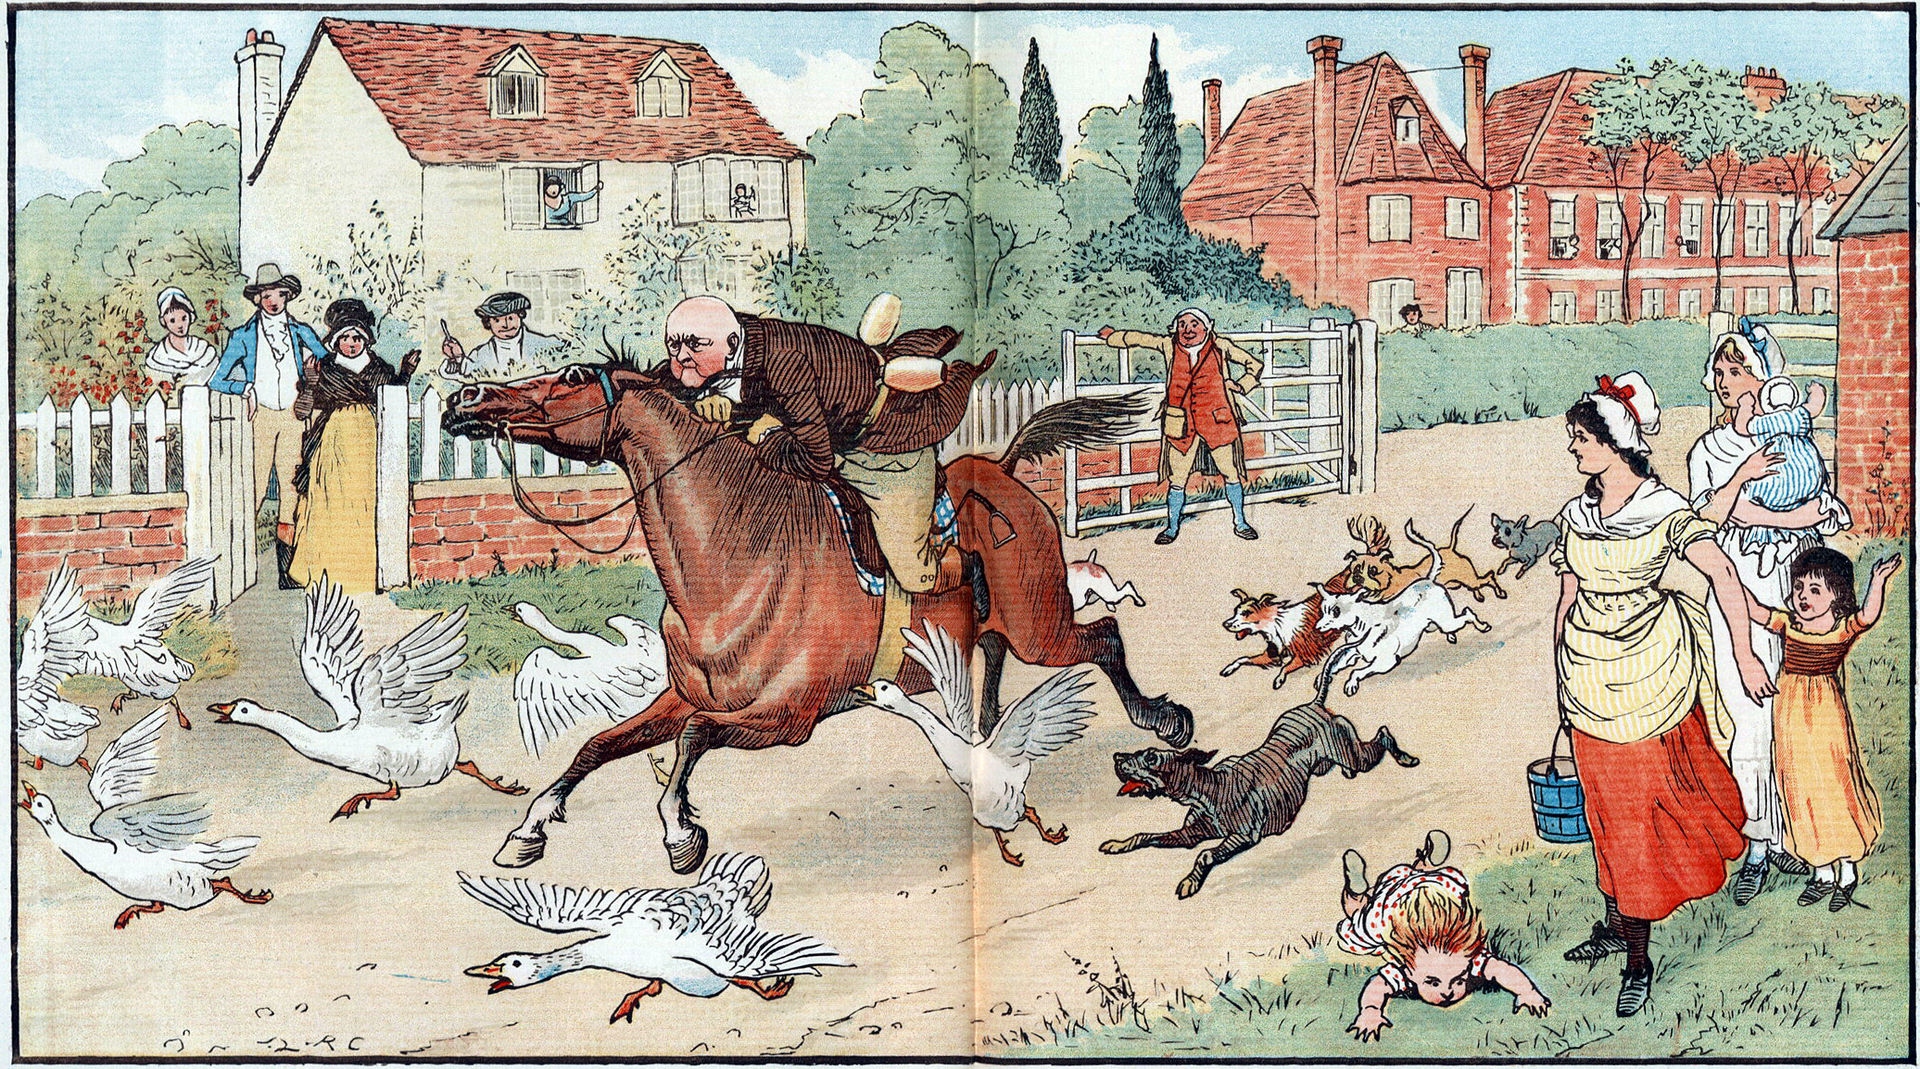 Randolph Caldecott used a double spread (illustration across two pages) for this illustration in The Diverting History of John Gilpin